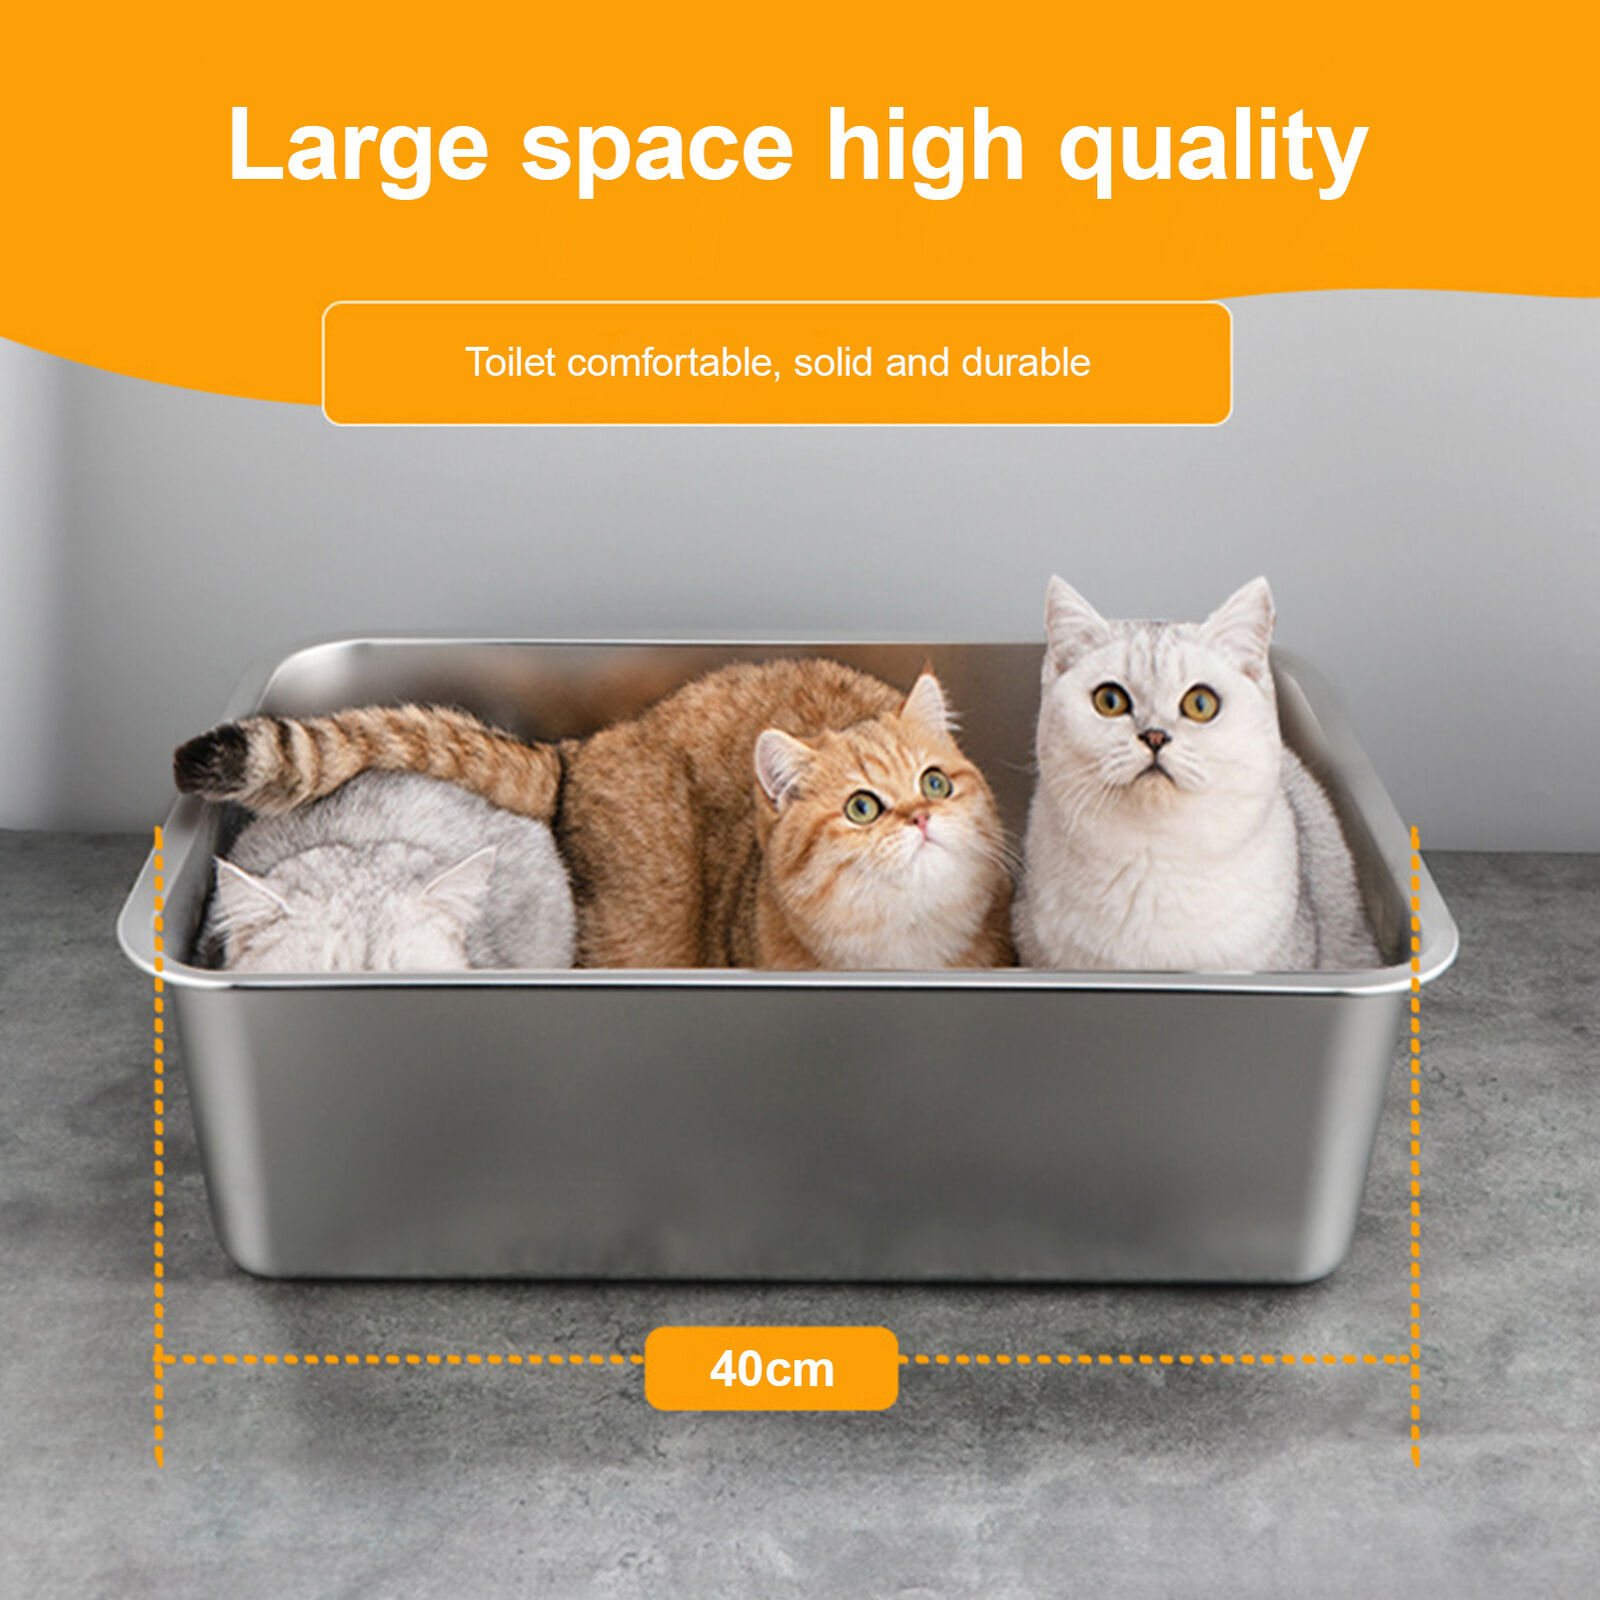 Low Entry Stainless Steel Litter Box Durable Cat with Design Spacious Unbranded - фотография #3